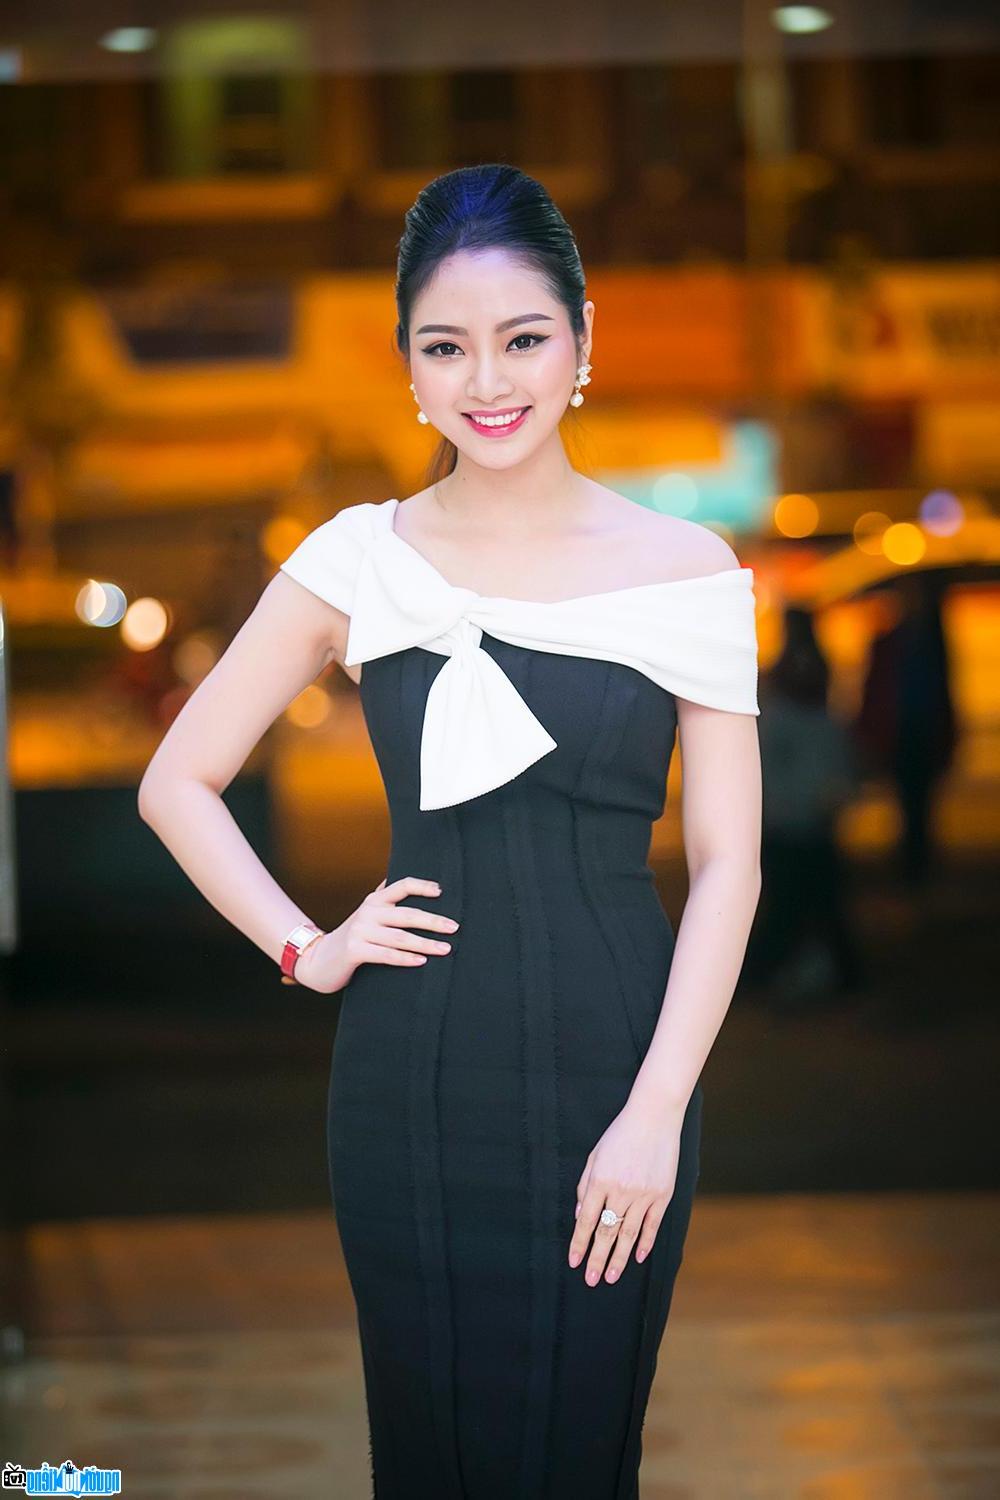 A new photo of Nguyen Ngoc Anh- the famous Miss Thanh Hoa- Vietnam